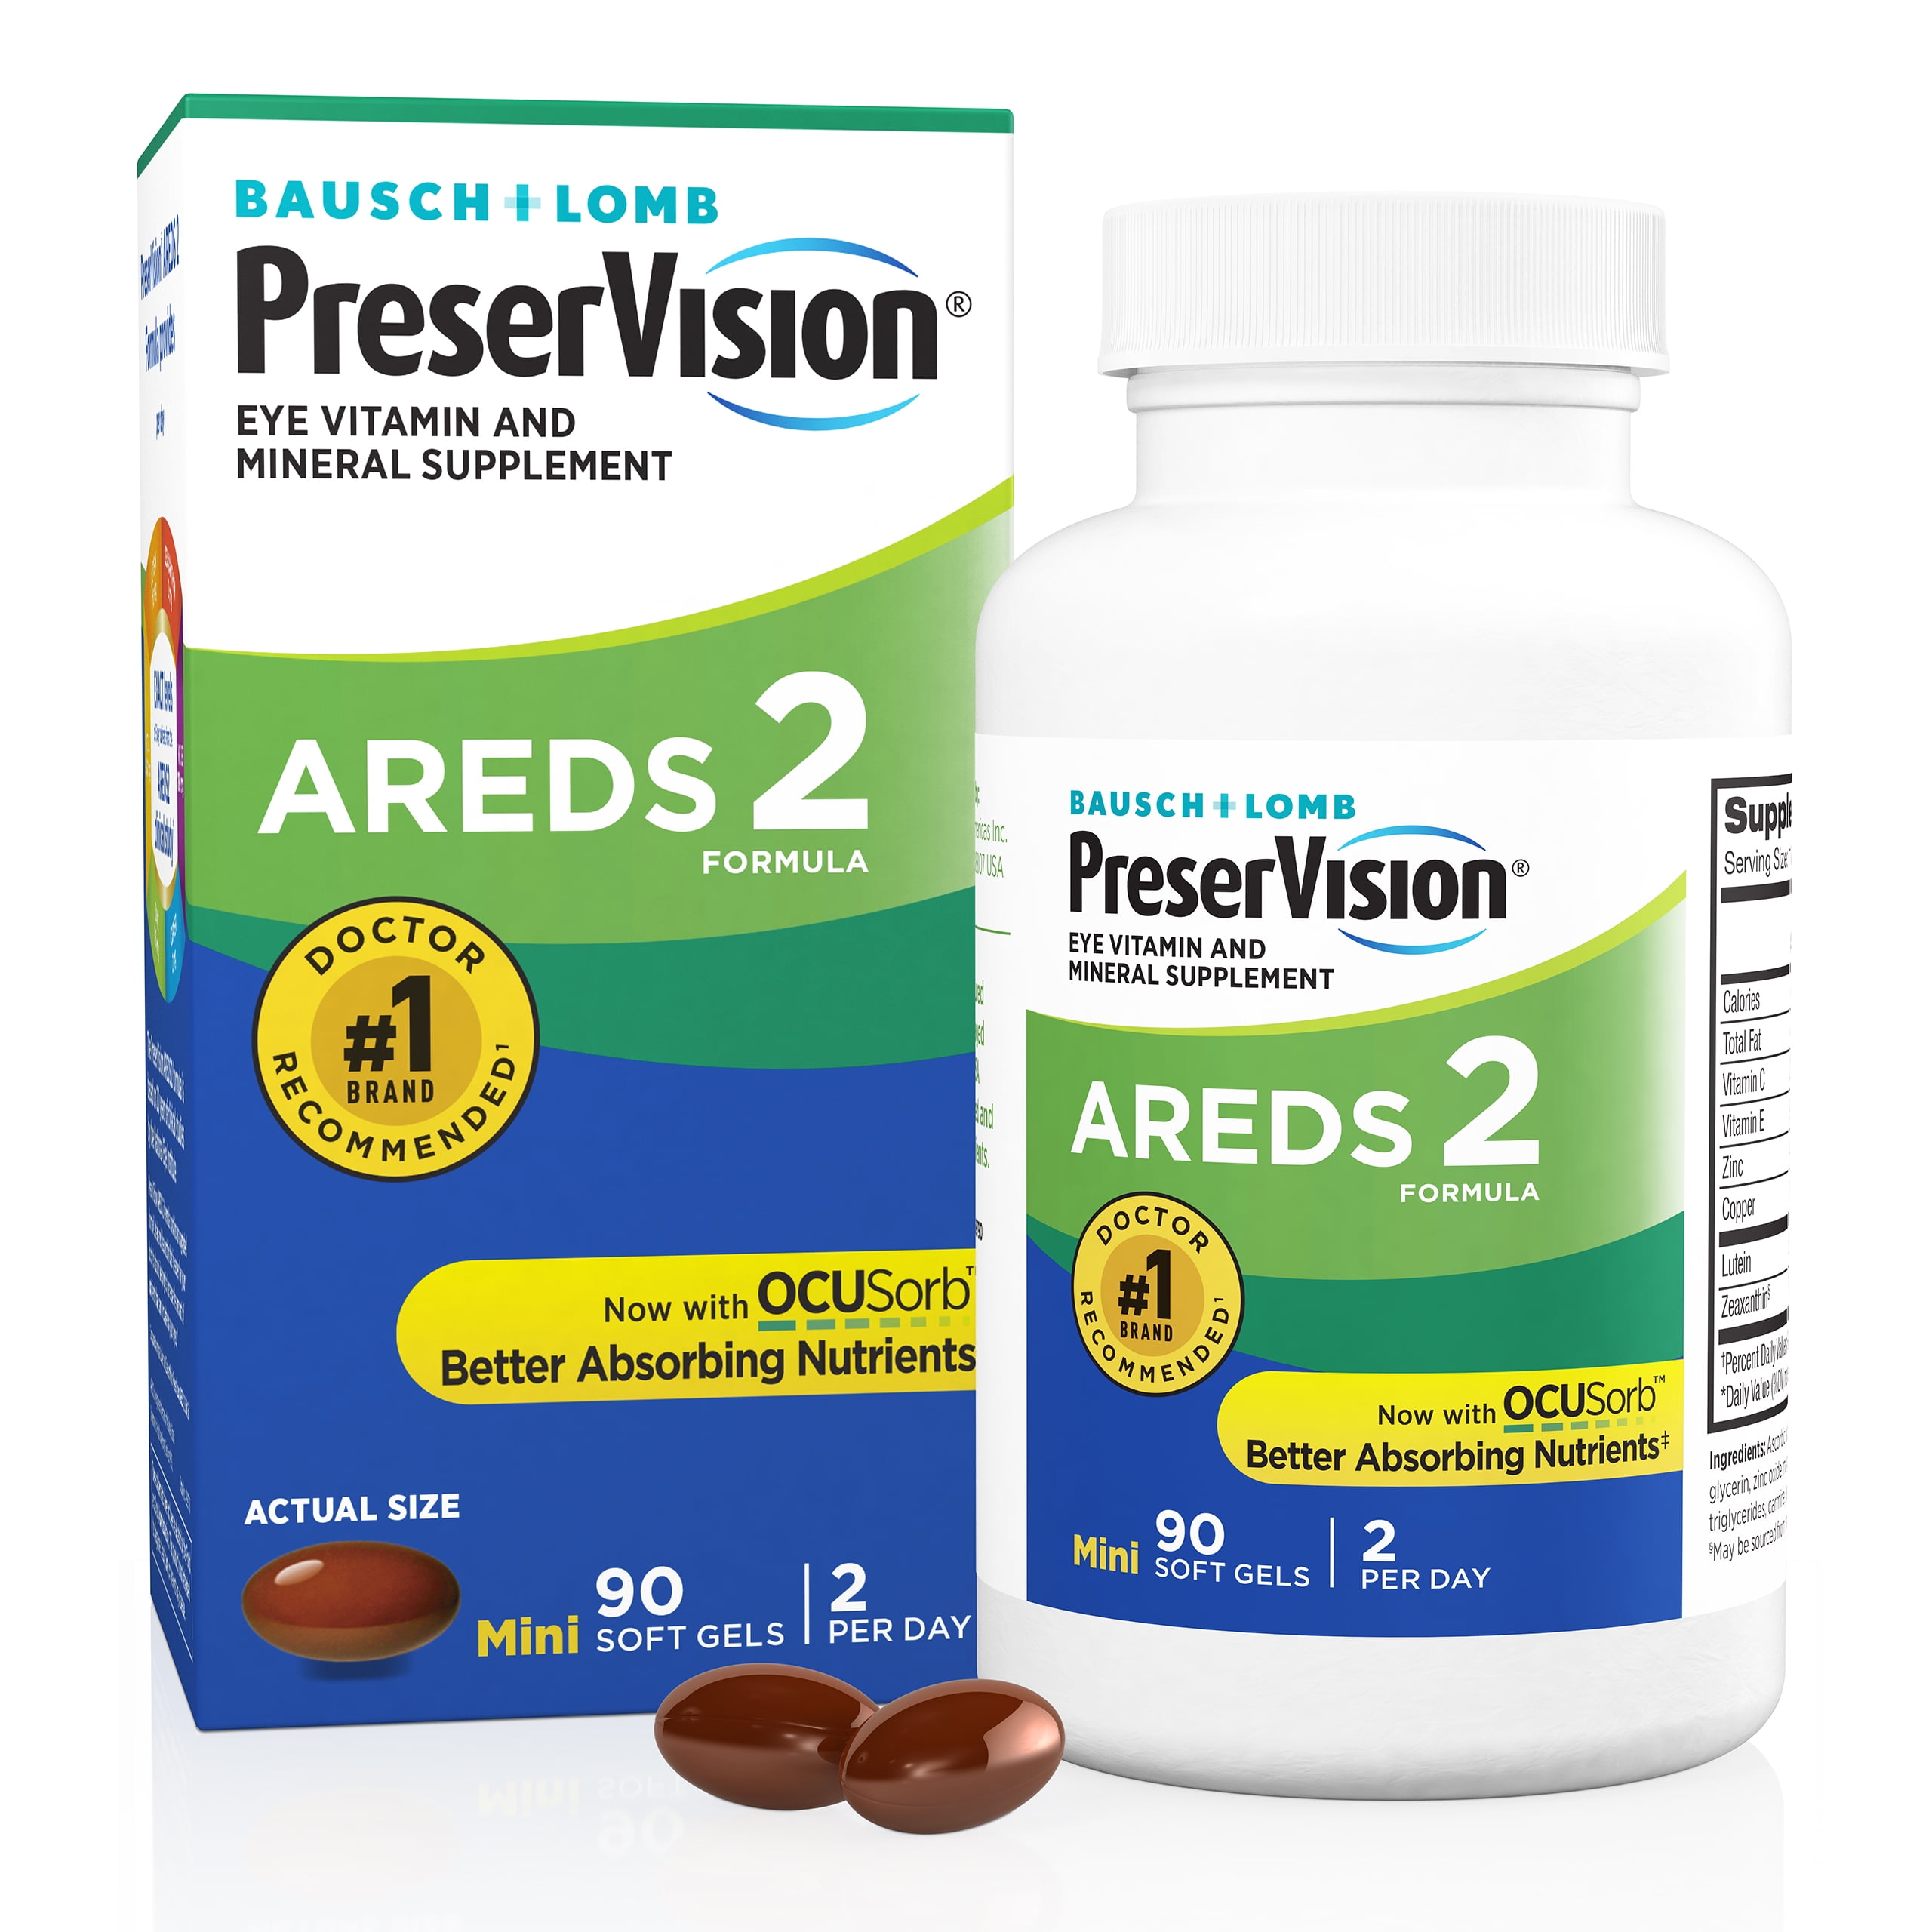 PreserVision AREDS 2 Formula + Multivitamin, Eye Vitamin and Mineral Supplement with Lutein & ZeaxanthinFrom Bausch + Lomb, 90 Soft Gels (MiniGels)